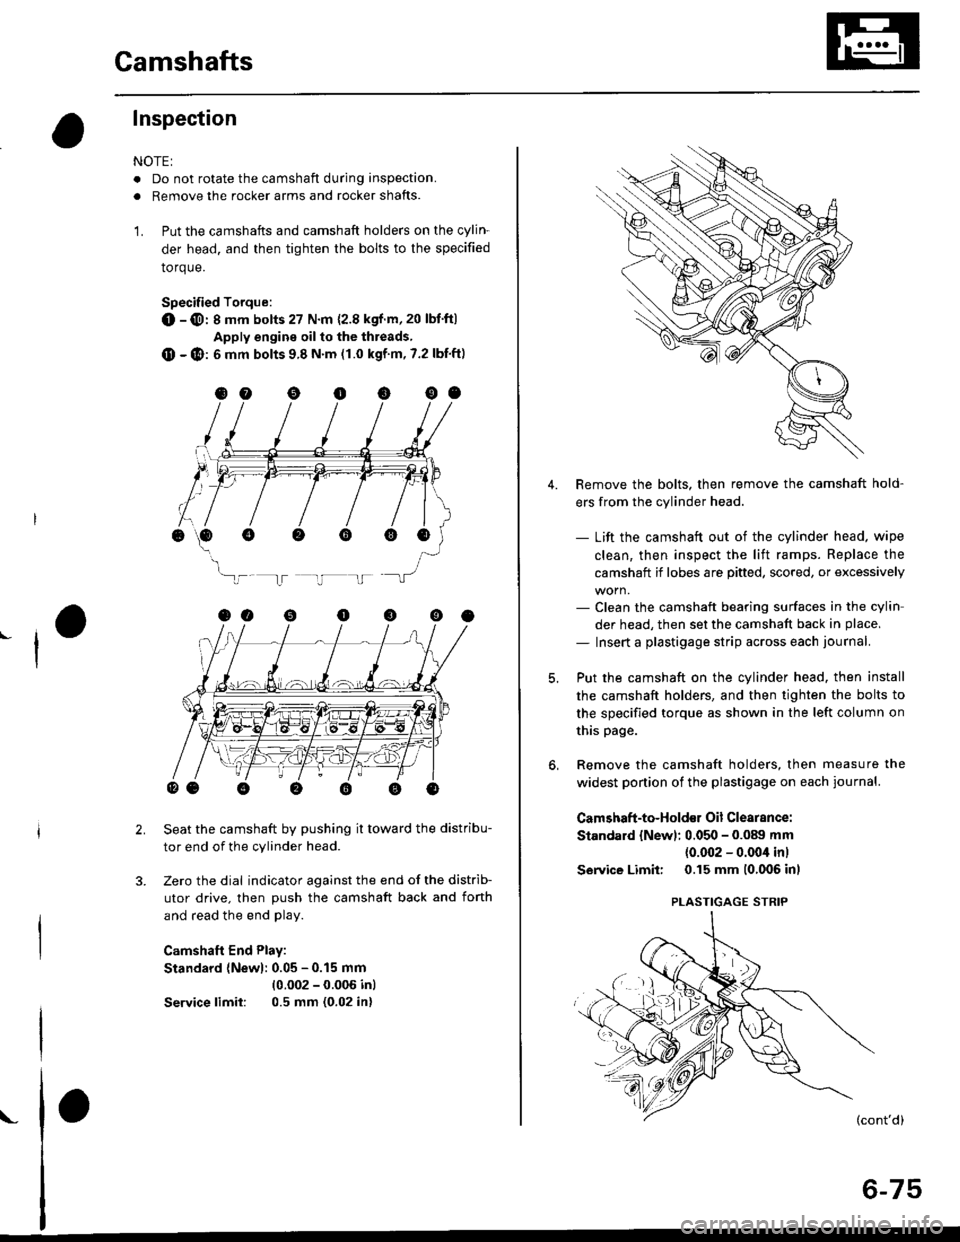 HONDA CIVIC 1996 6.G Owners Manual Camshafts
Inspection
NOTE:
. Do not rotate the camshaft during inspection.
. Removg the rocker arms and rocker shafts.
L Put the camshafts and camshaft holders on the cylin-
der head. and then tighte